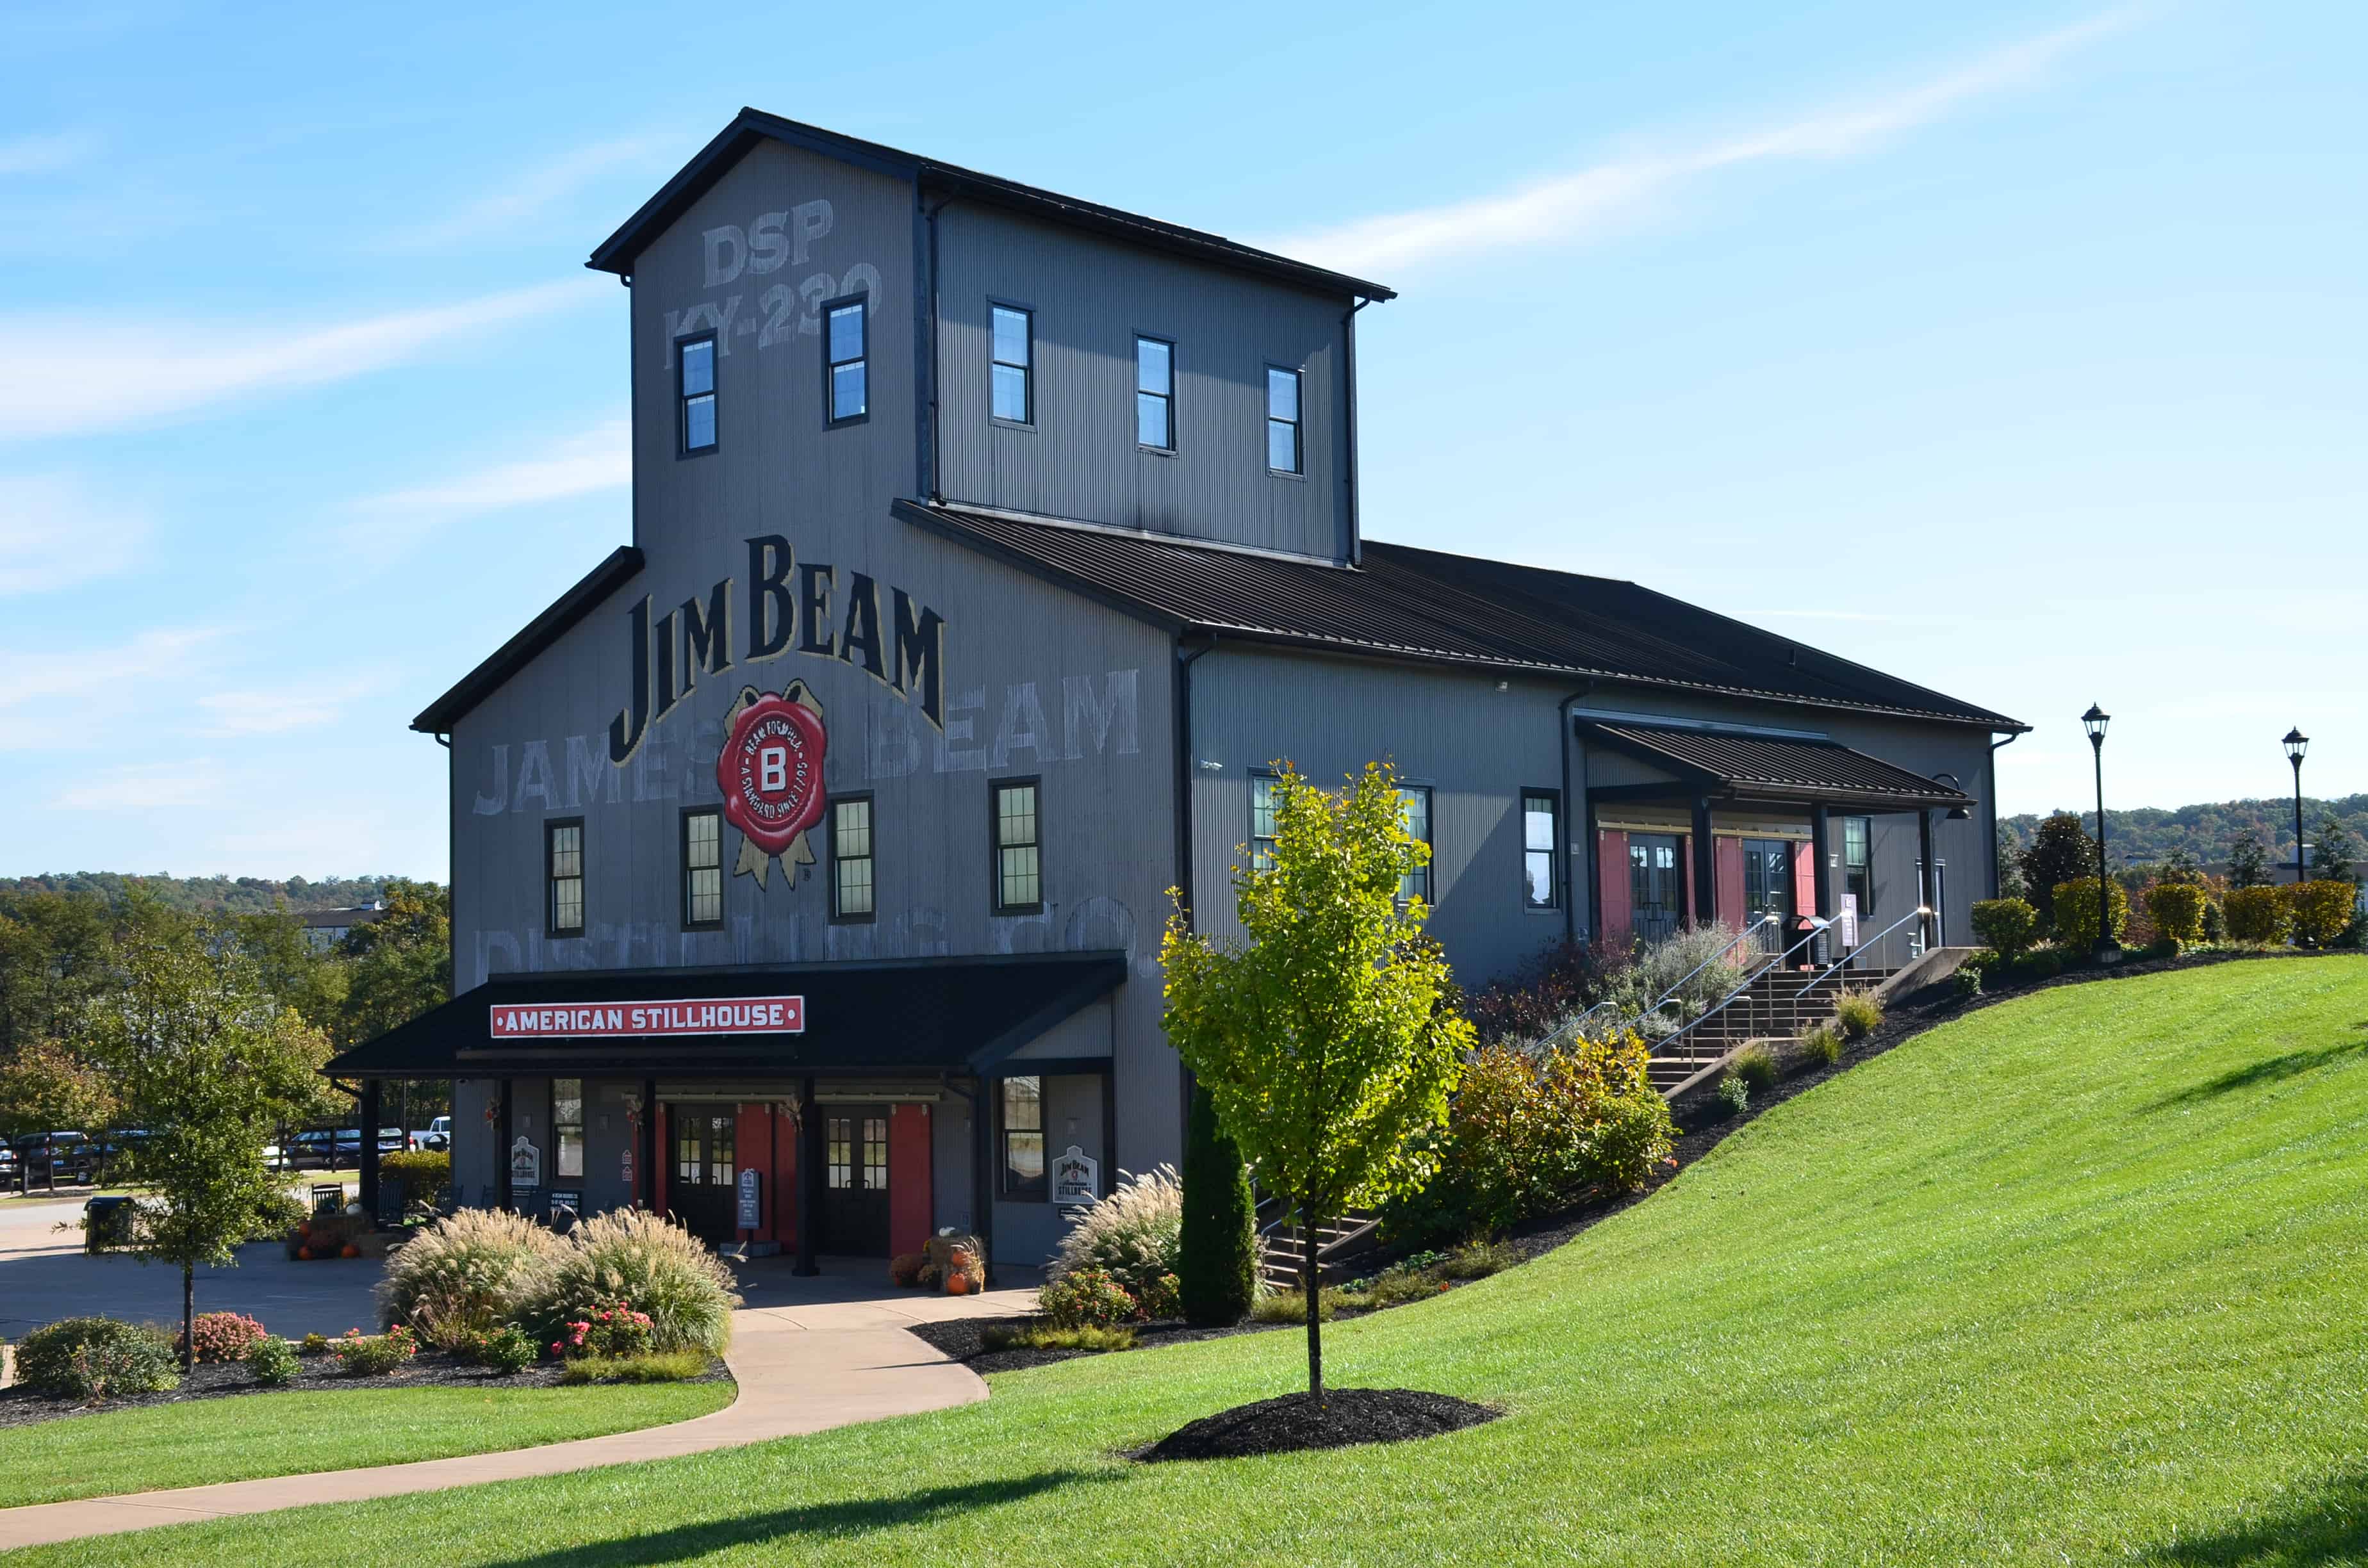 Gift shop at Jim Beam American Stillhouse in Clermont, Kentucky